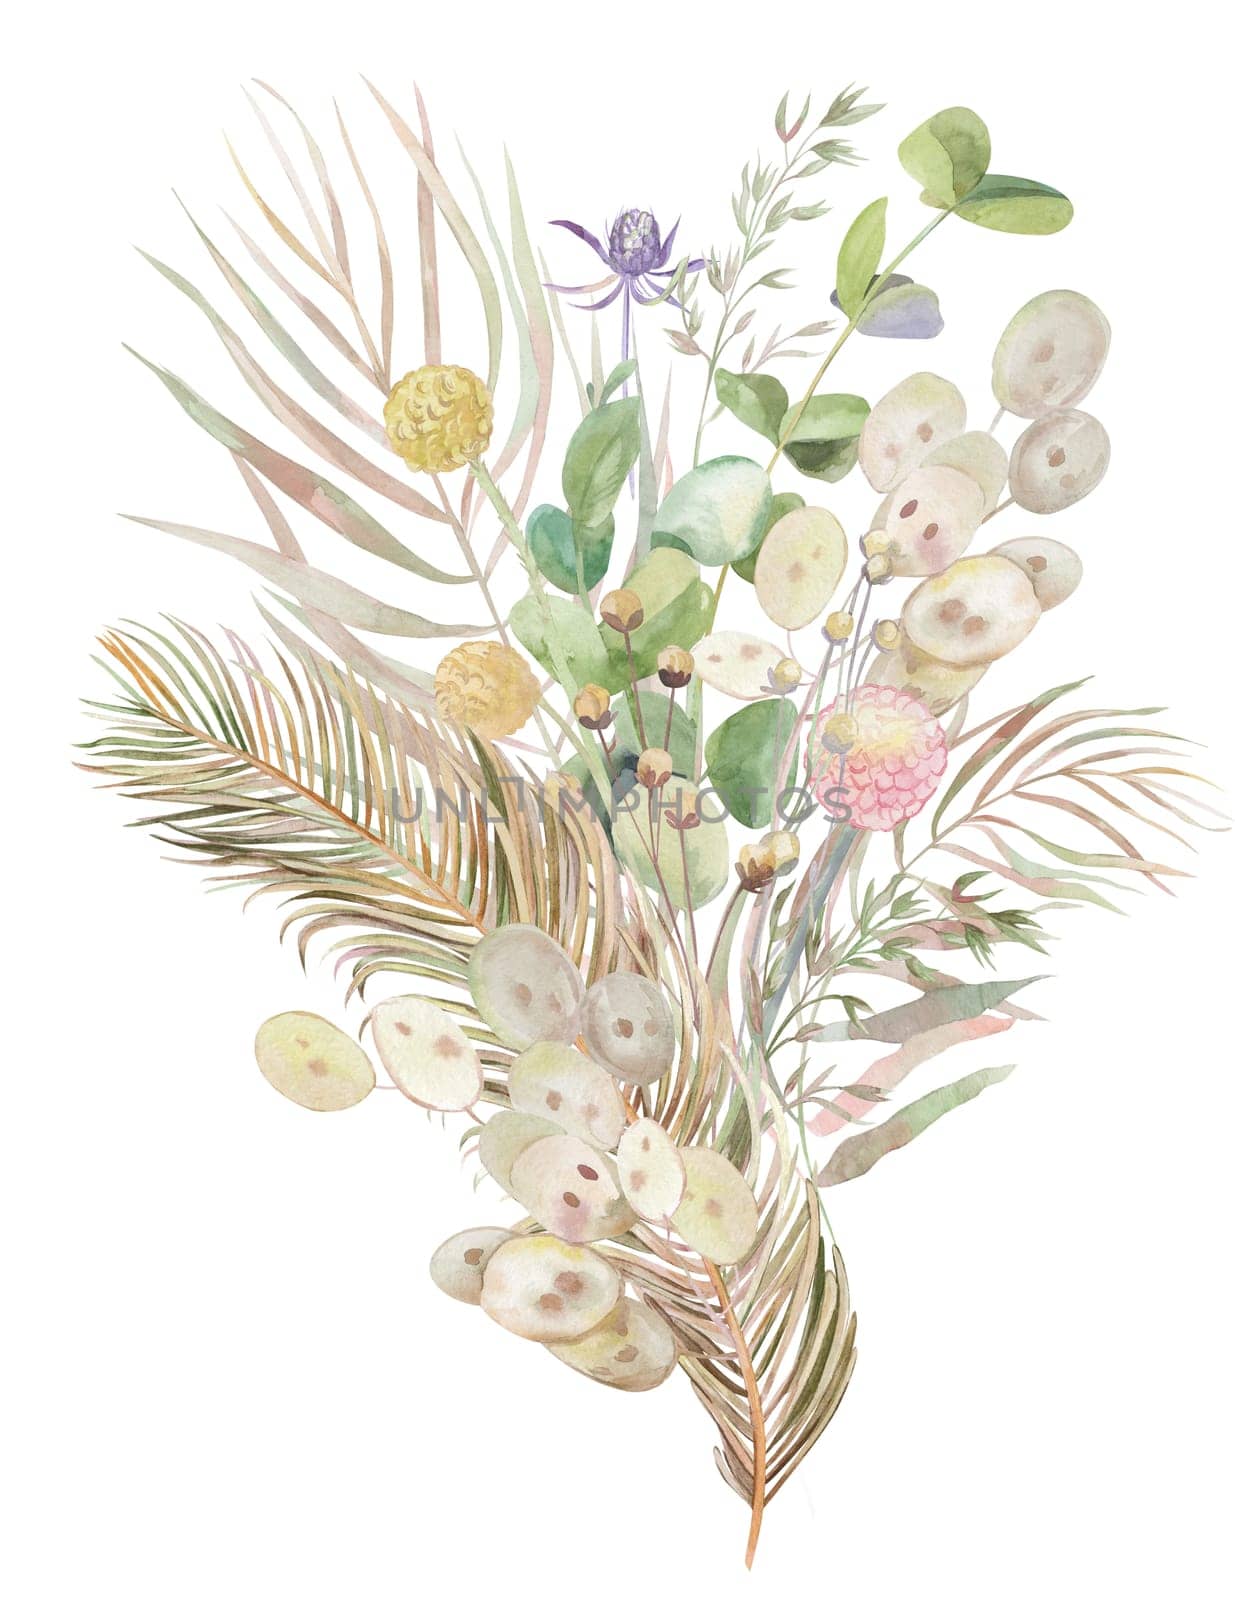 Illustration with a bouquet of dried flowers with tropical leaves of palm trees and herbs drawn in watercolor on a white background